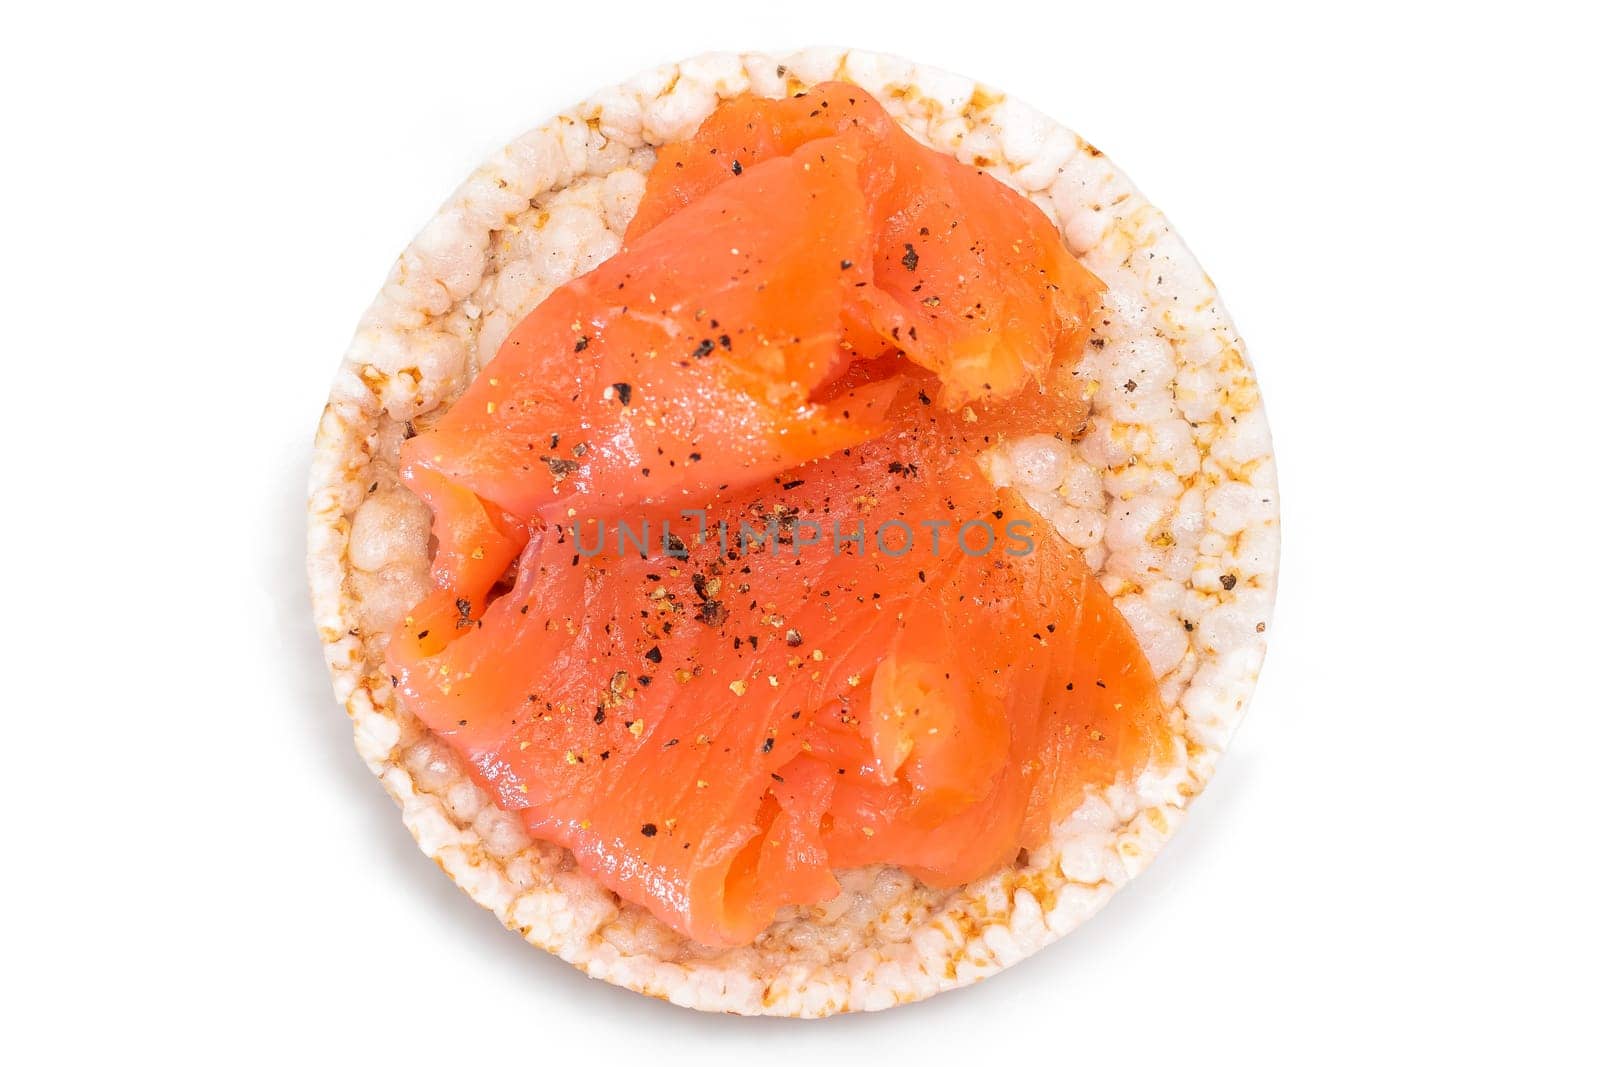 Rice Cake Sandwich with Fresh Salmon Slices Isolated on White by InfinitumProdux